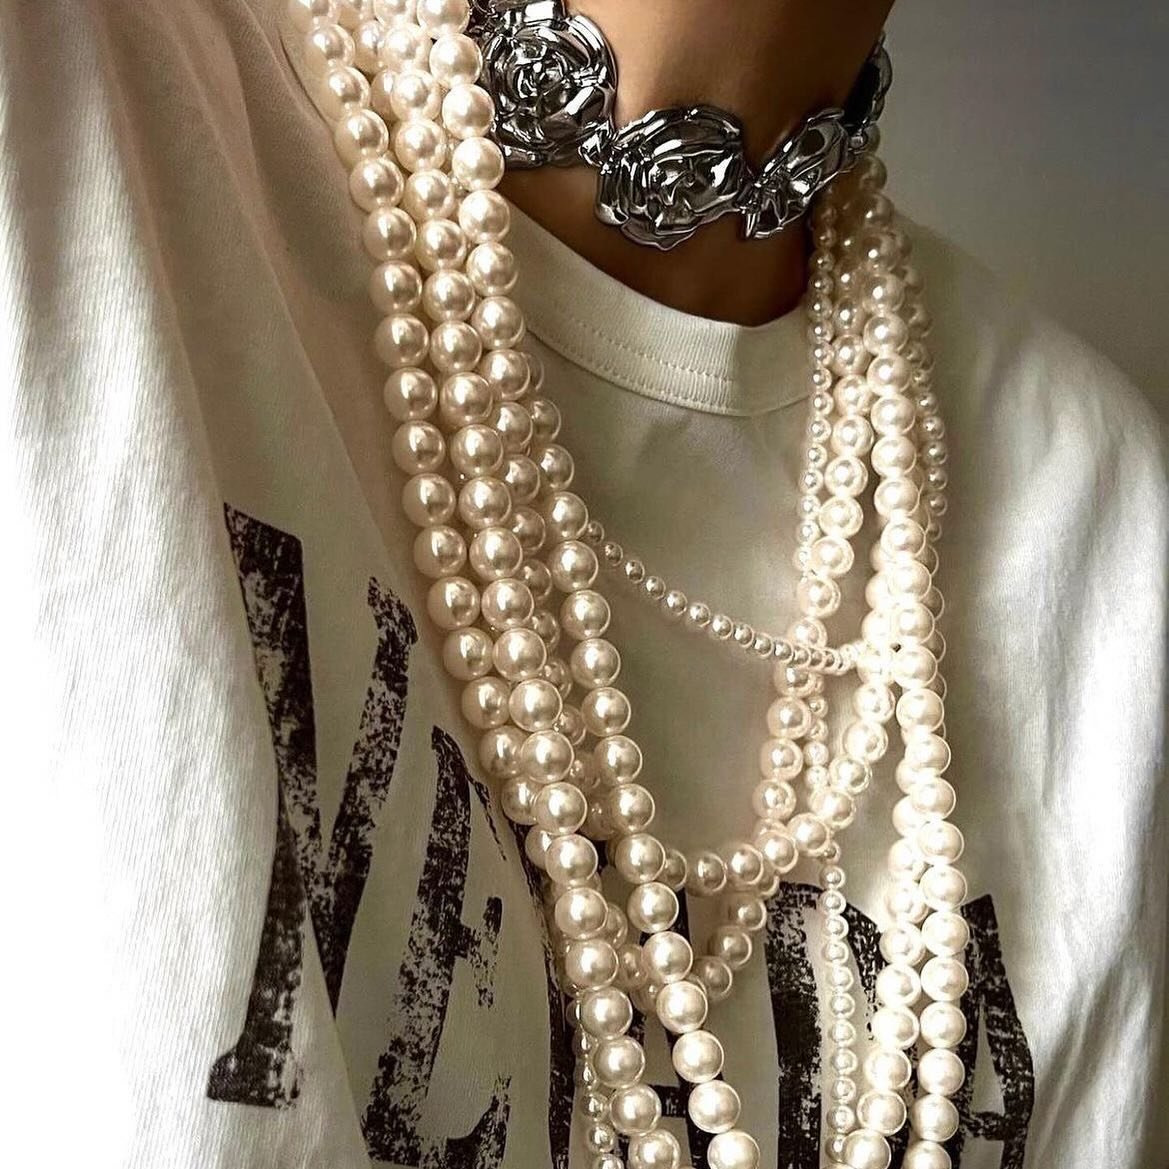 Loving this high-low combo of a vintage tee and extravagant pearls 💎 it&rsquo;s almost Friday and this look is on our weekend mood board 🔥

#accessories #highlowfashion #casualoutfit #styleideas #styleinfluencer #styleinspiration #outfitoftheday #o